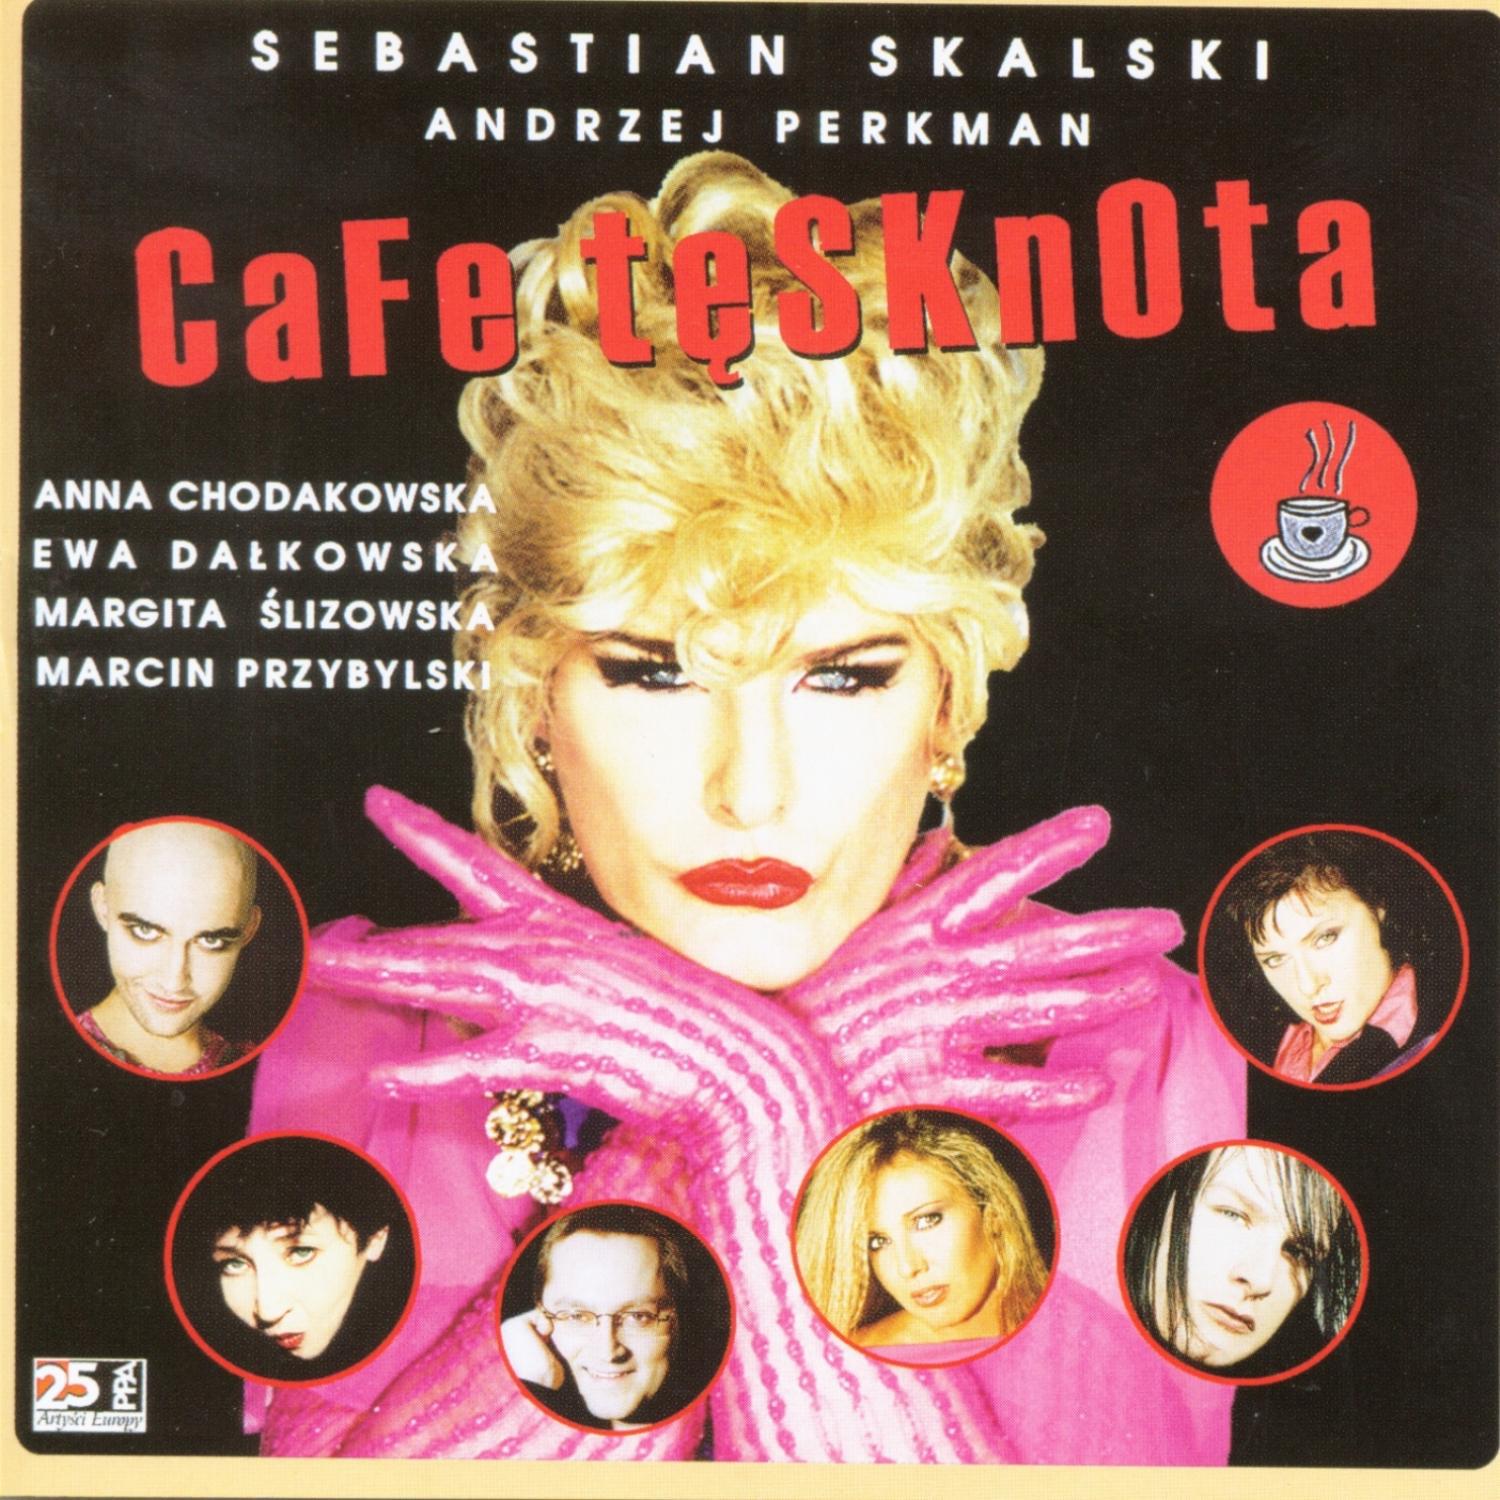 CaFe longing, CaFe tesknota - songs from a musical inspired by Pedro Almodovar movies